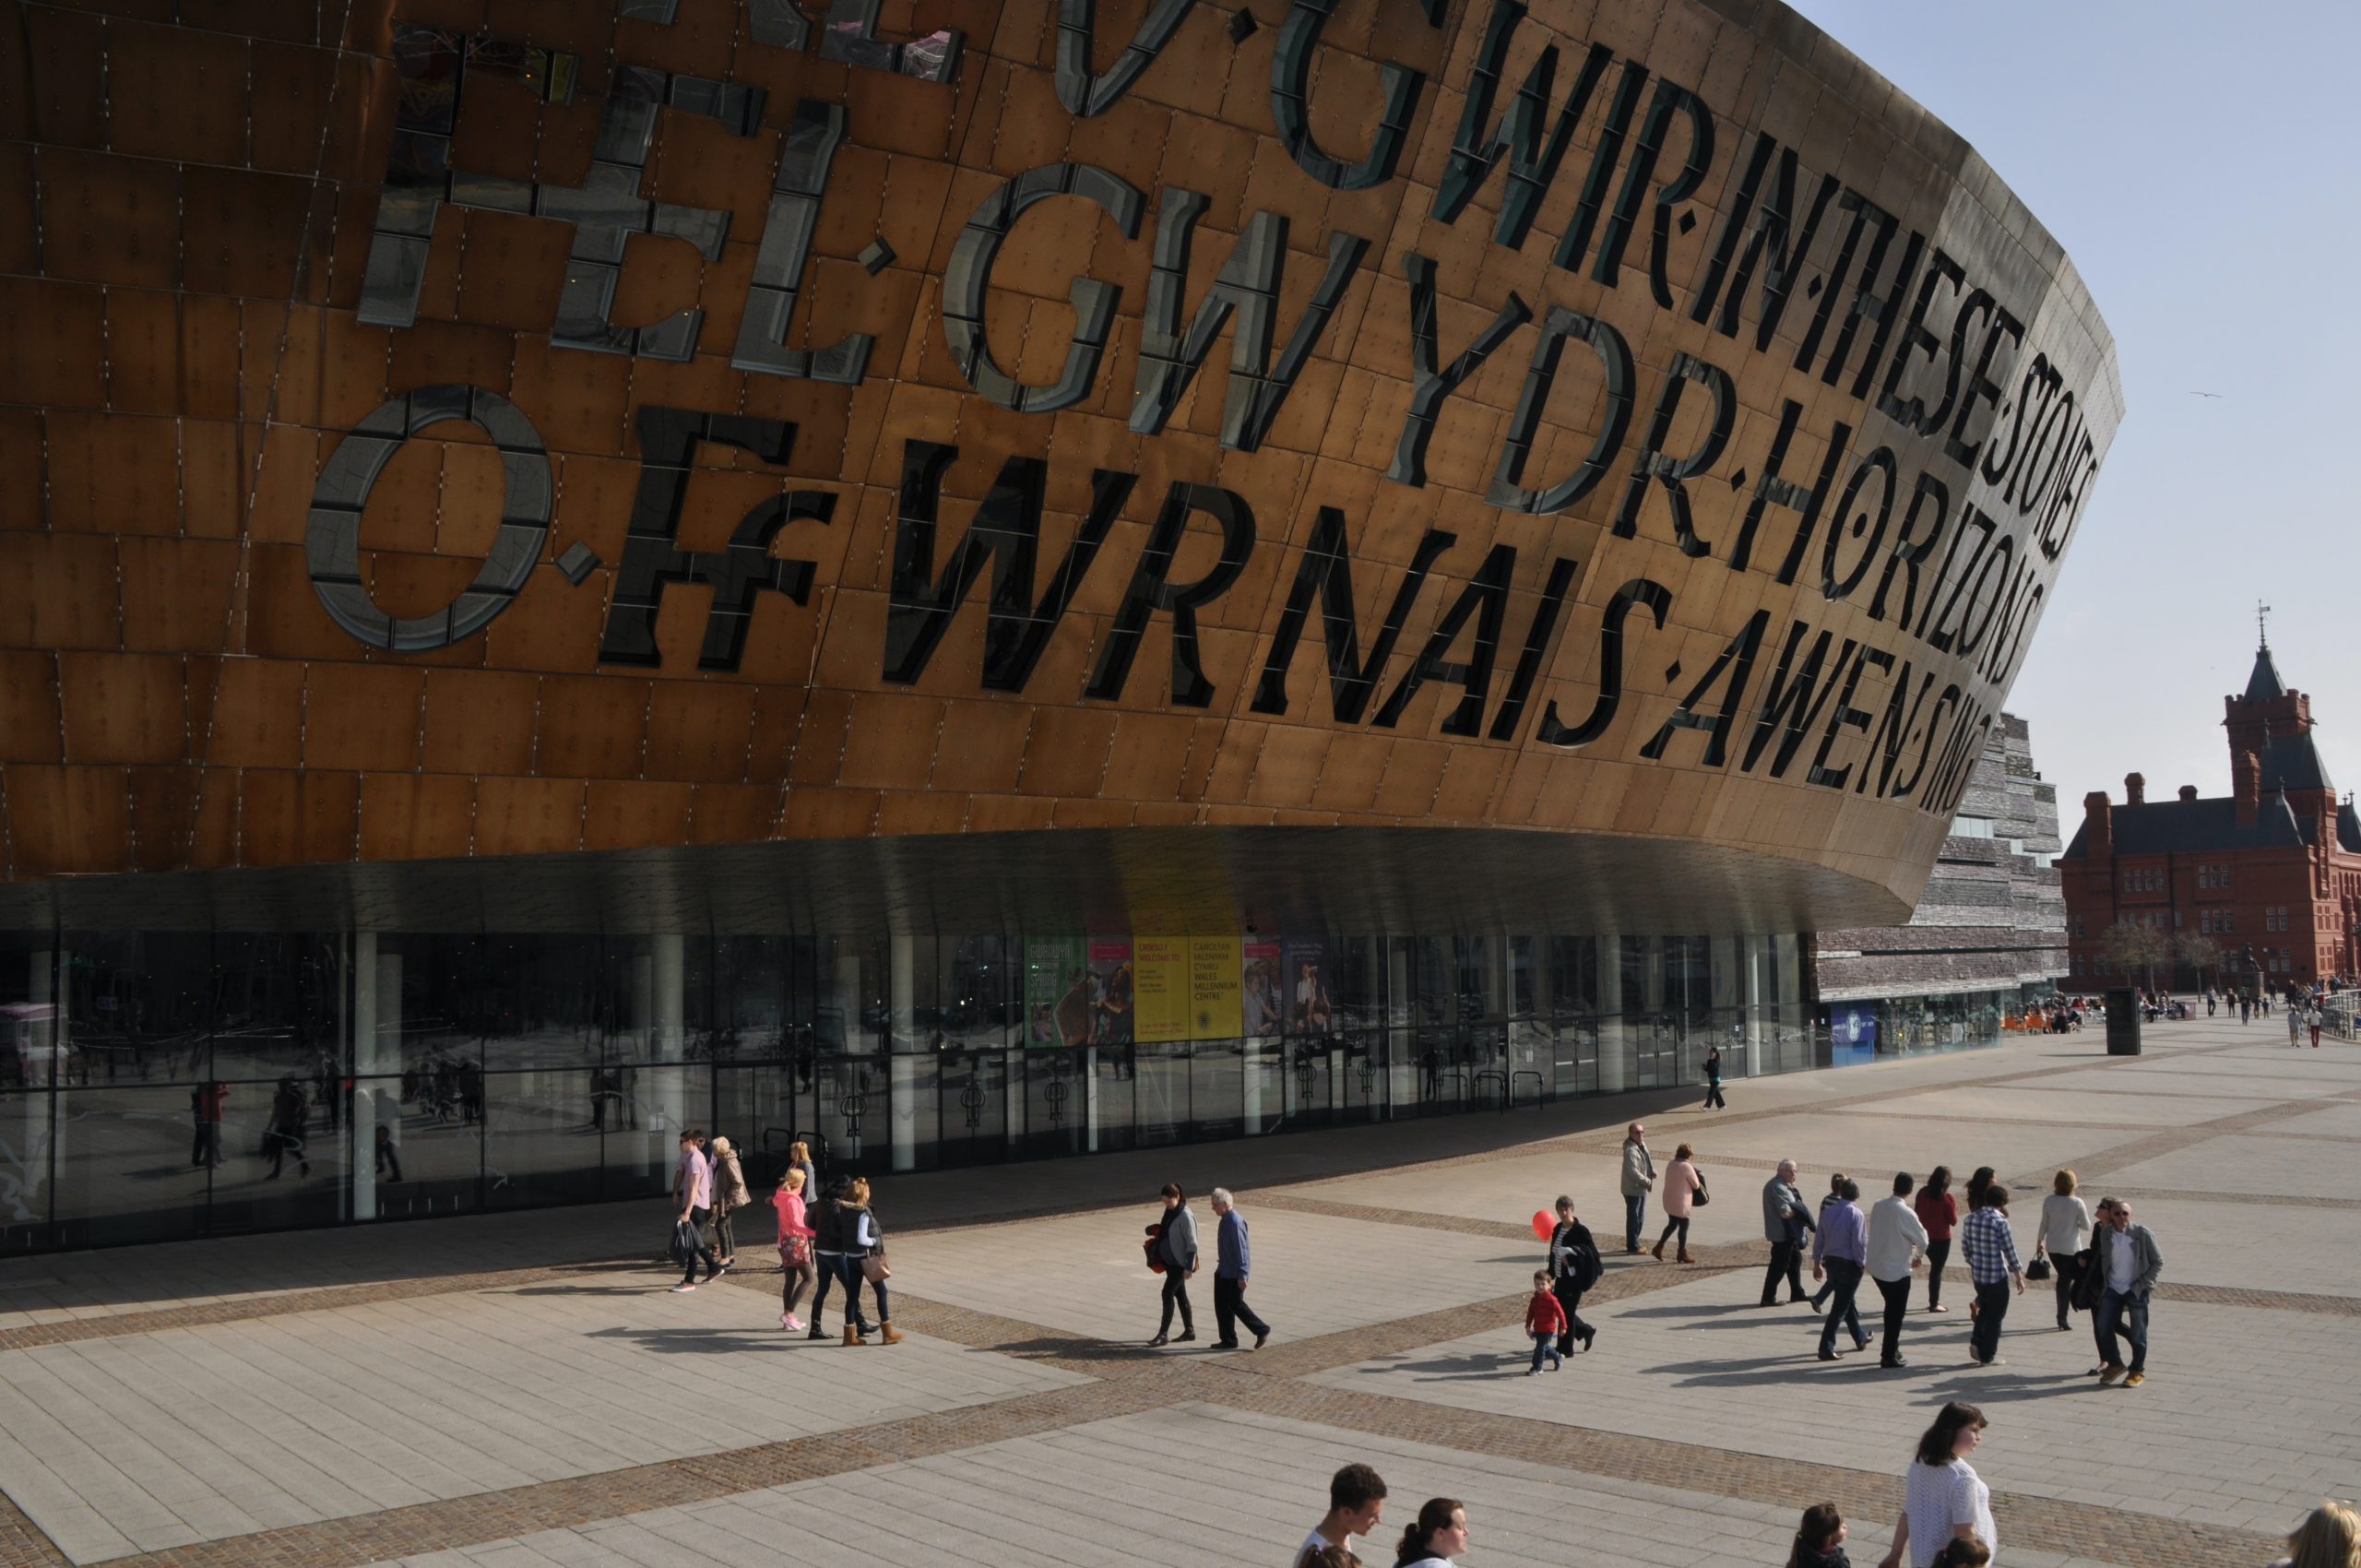 Gwyneth Lewis' poetry on the façade of the Wales Millennium Centre. 